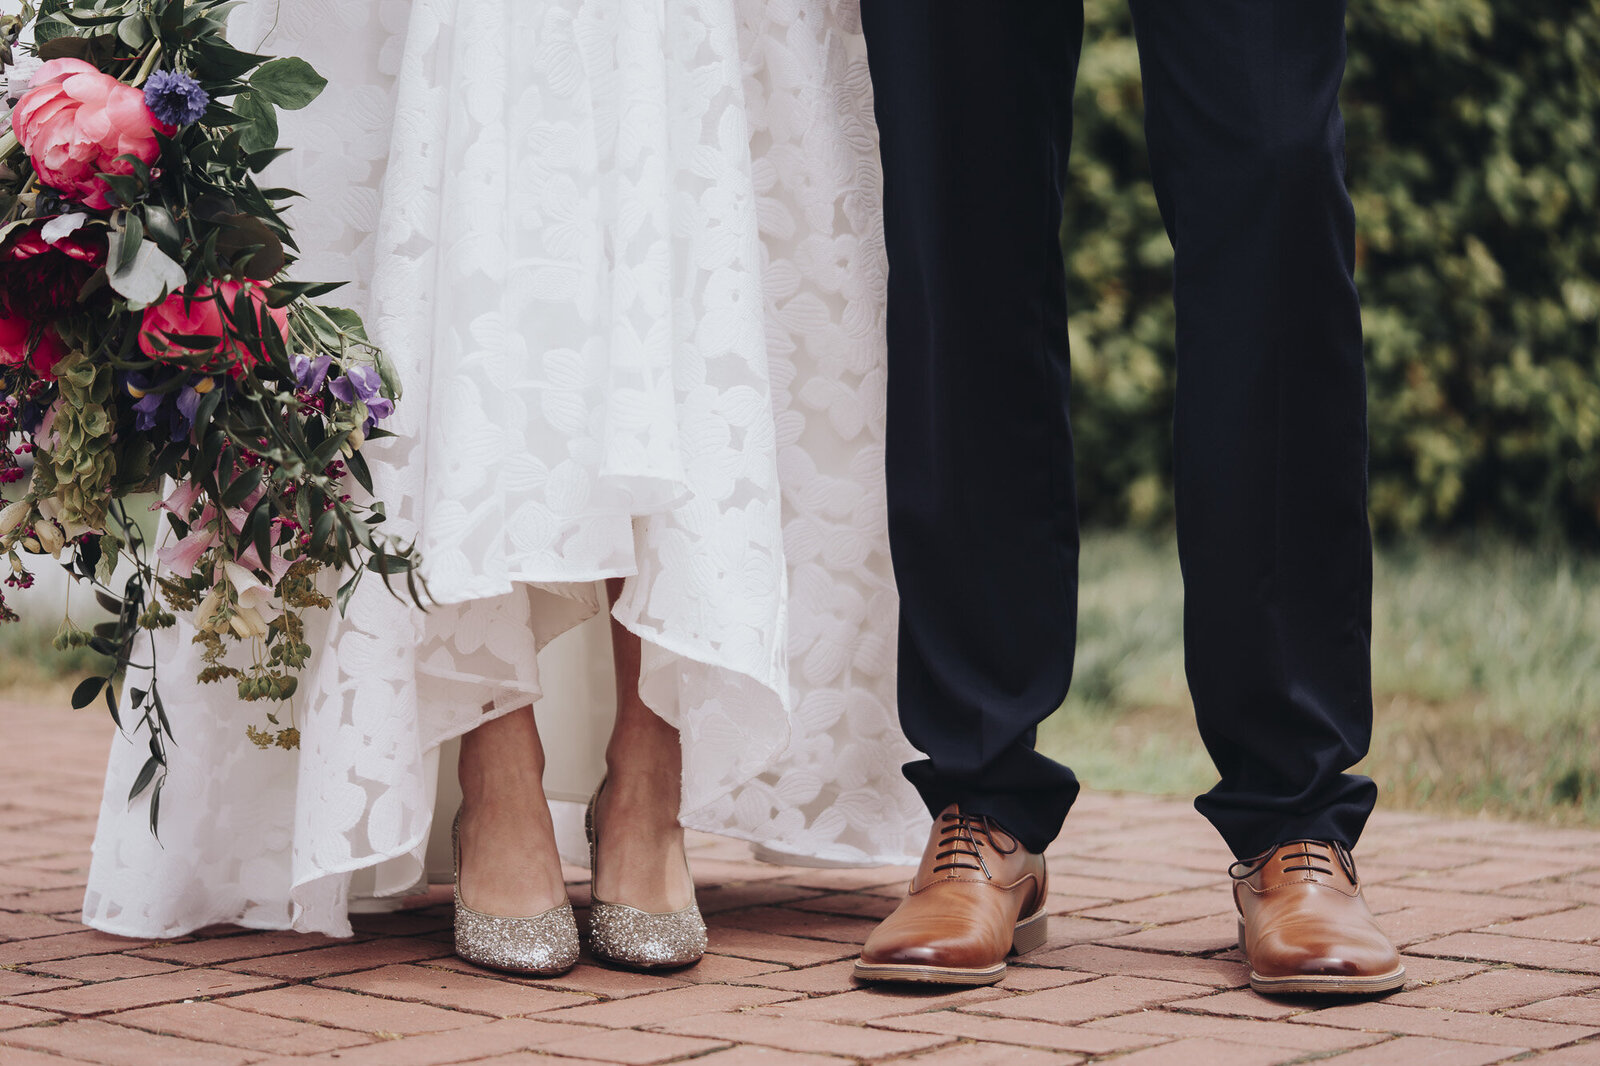 Bride with sparkly shoes and groom with brown shoes